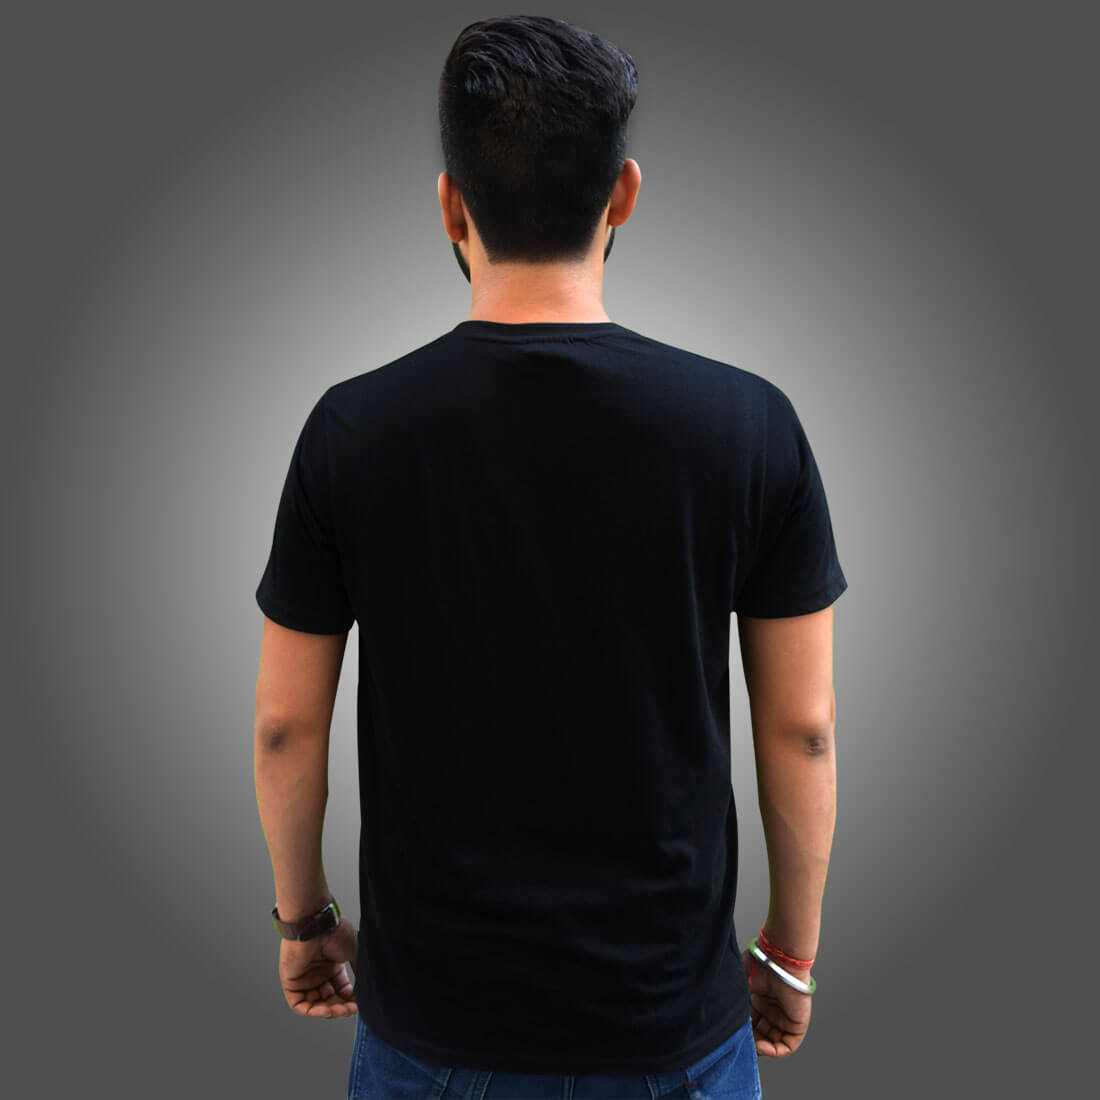 Aghoris Lifestyle Printed Black T Shirt Front and Back